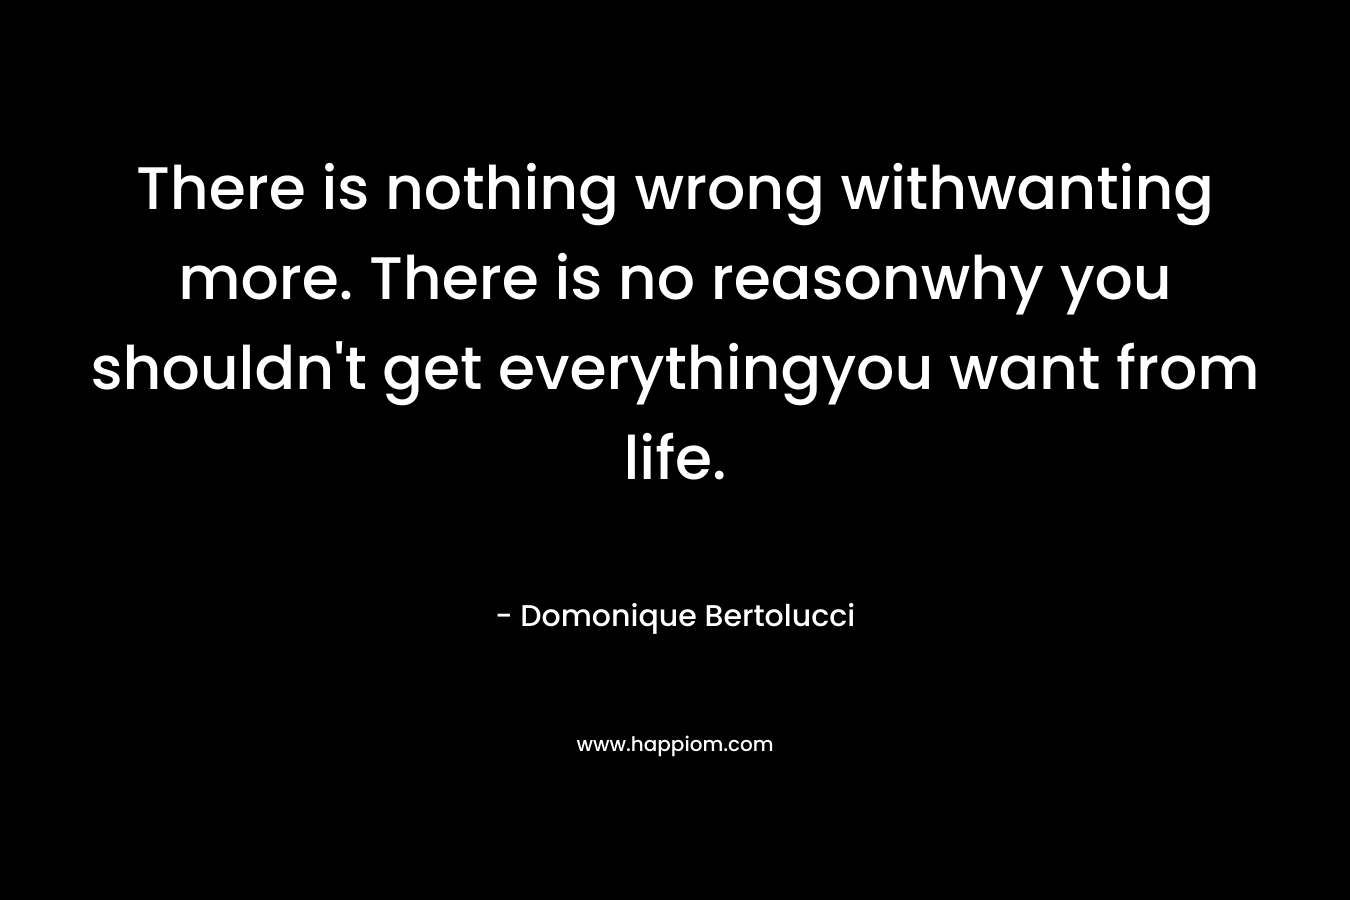 There is nothing wrong withwanting more. There is no reasonwhy you shouldn’t get everythingyou want from life. – Domonique Bertolucci